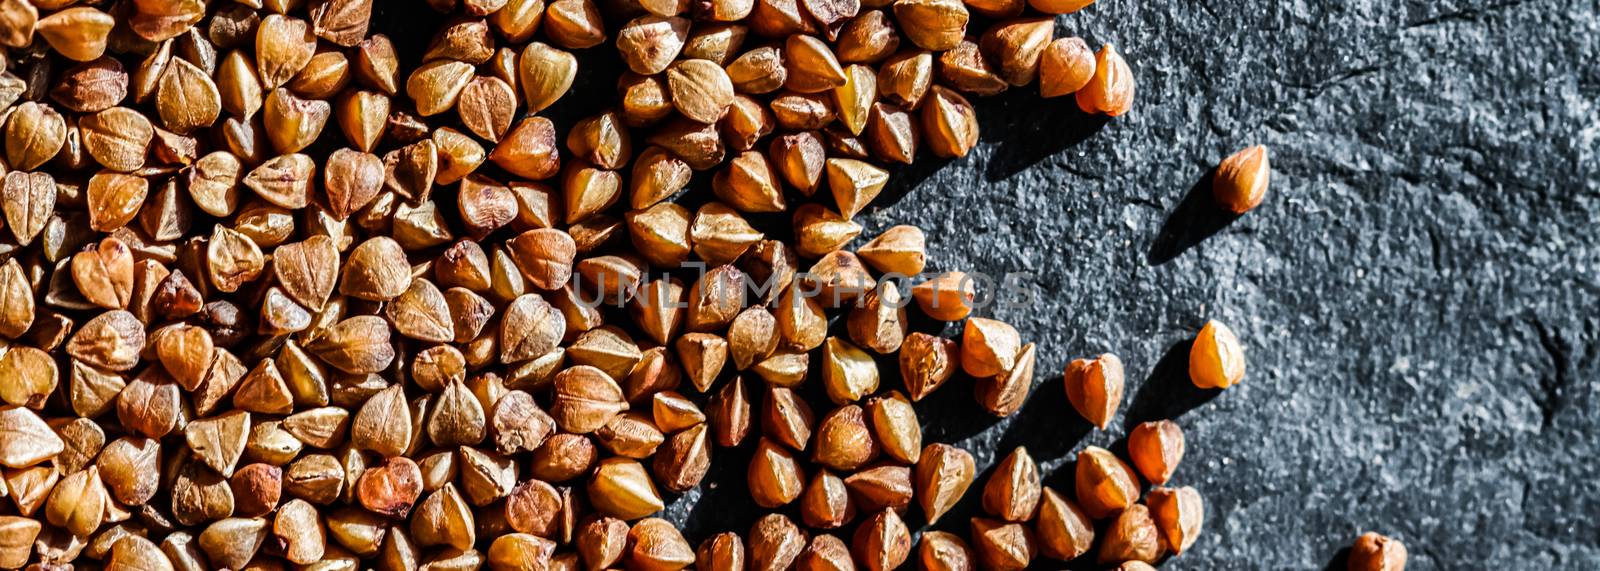 Buckwheat grain closeup, food texture and cook book background by Anneleven